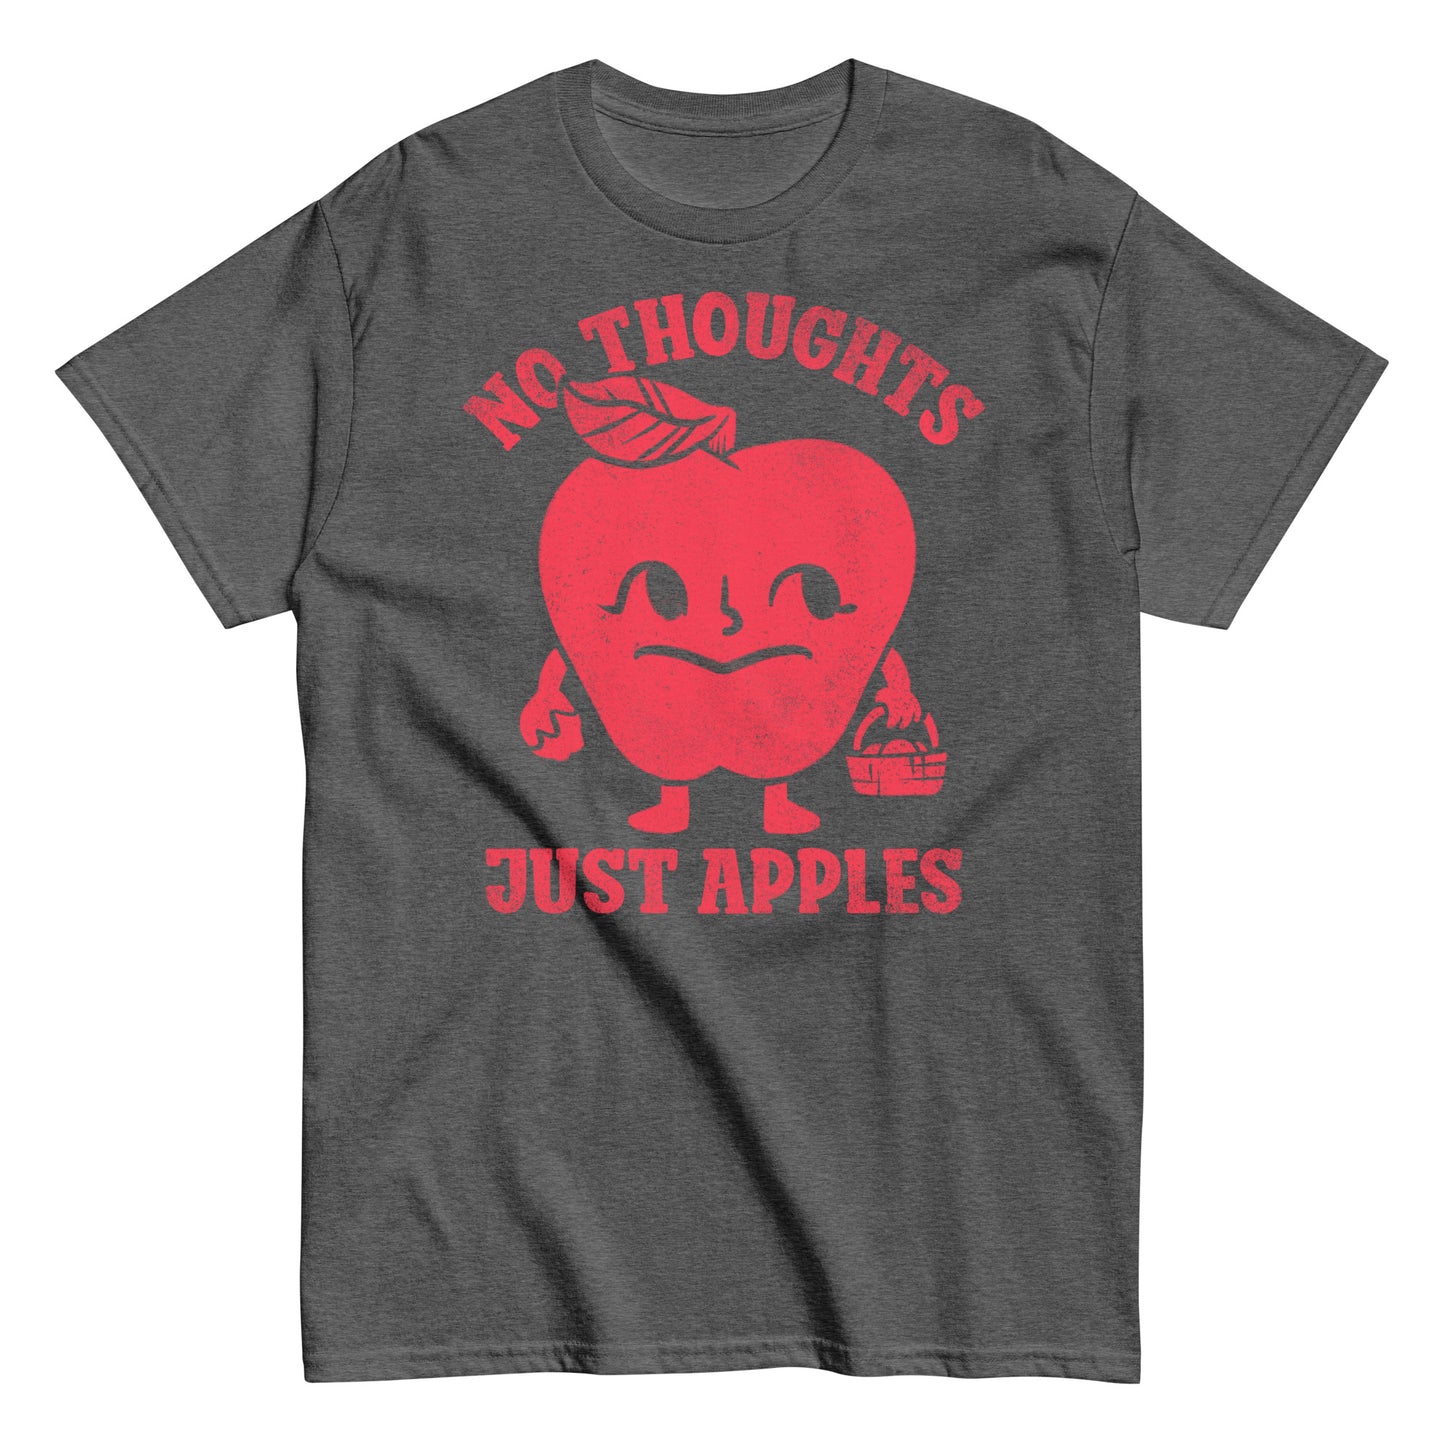 No Thoughts - Apple Picking T-Shirt